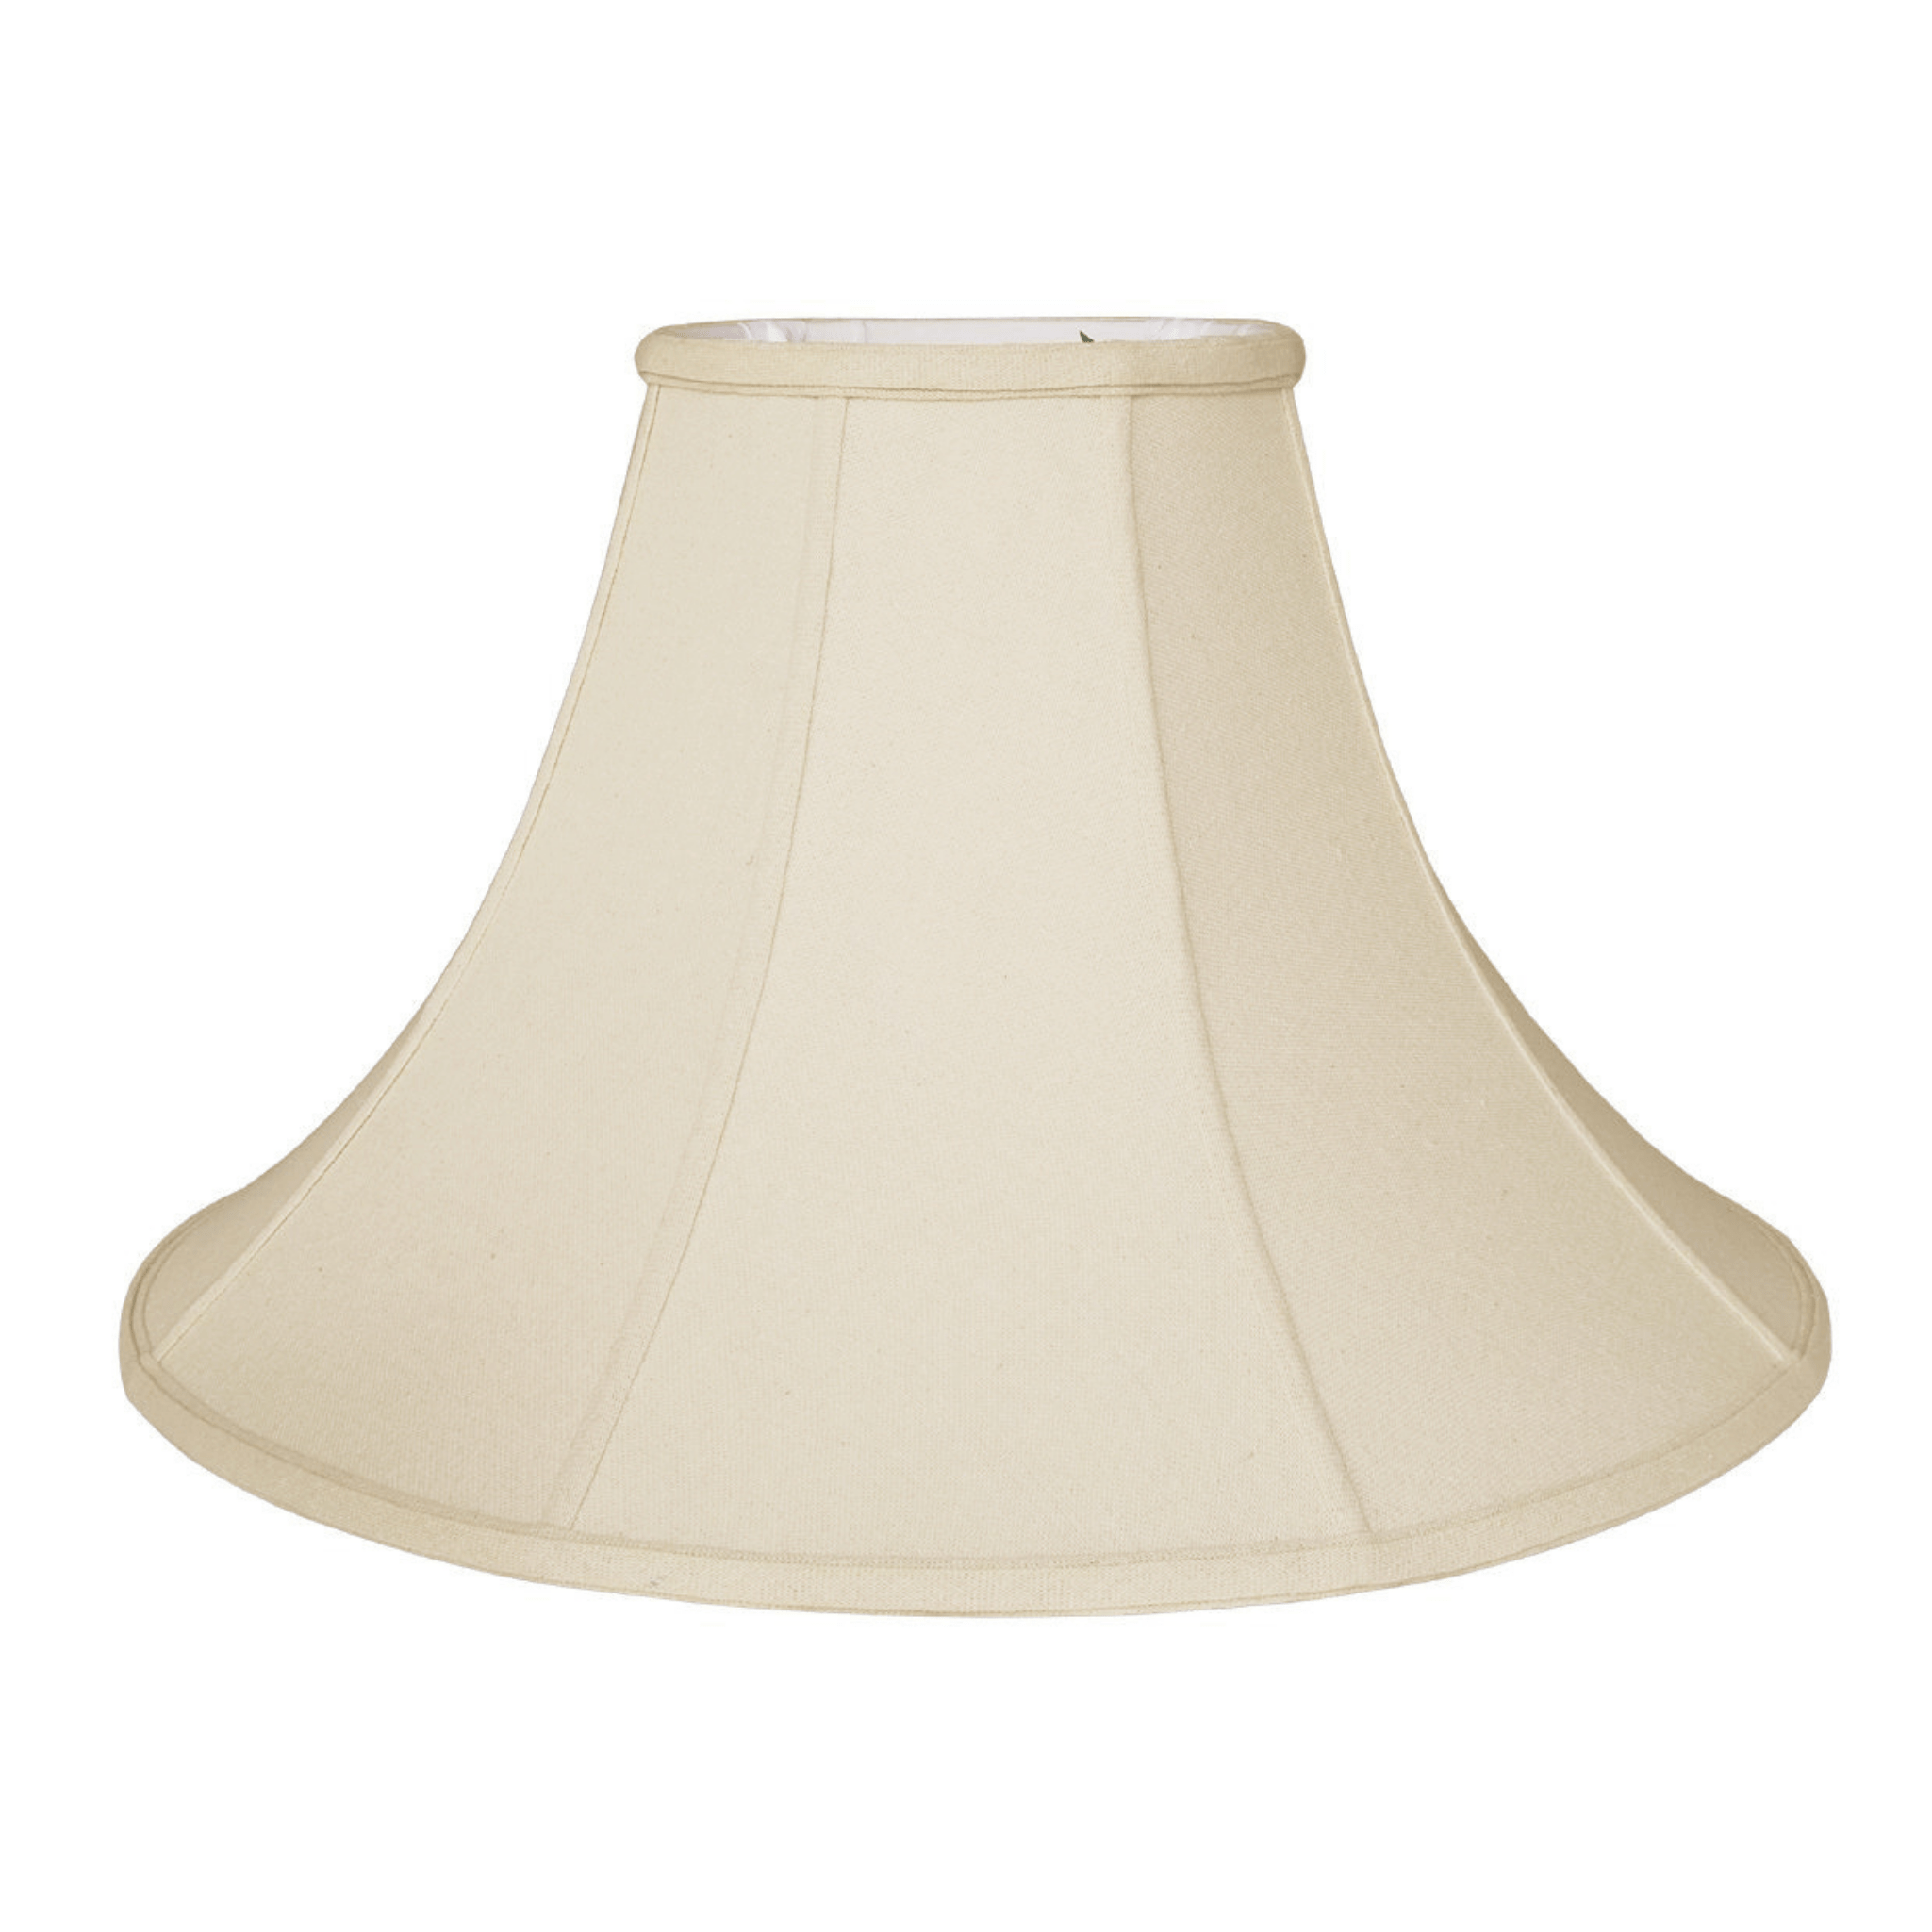 EE lamp shade 5.5 x 14 x 10'' (Washer) / Linen / Off White Linen Asian Style Lamp Shade